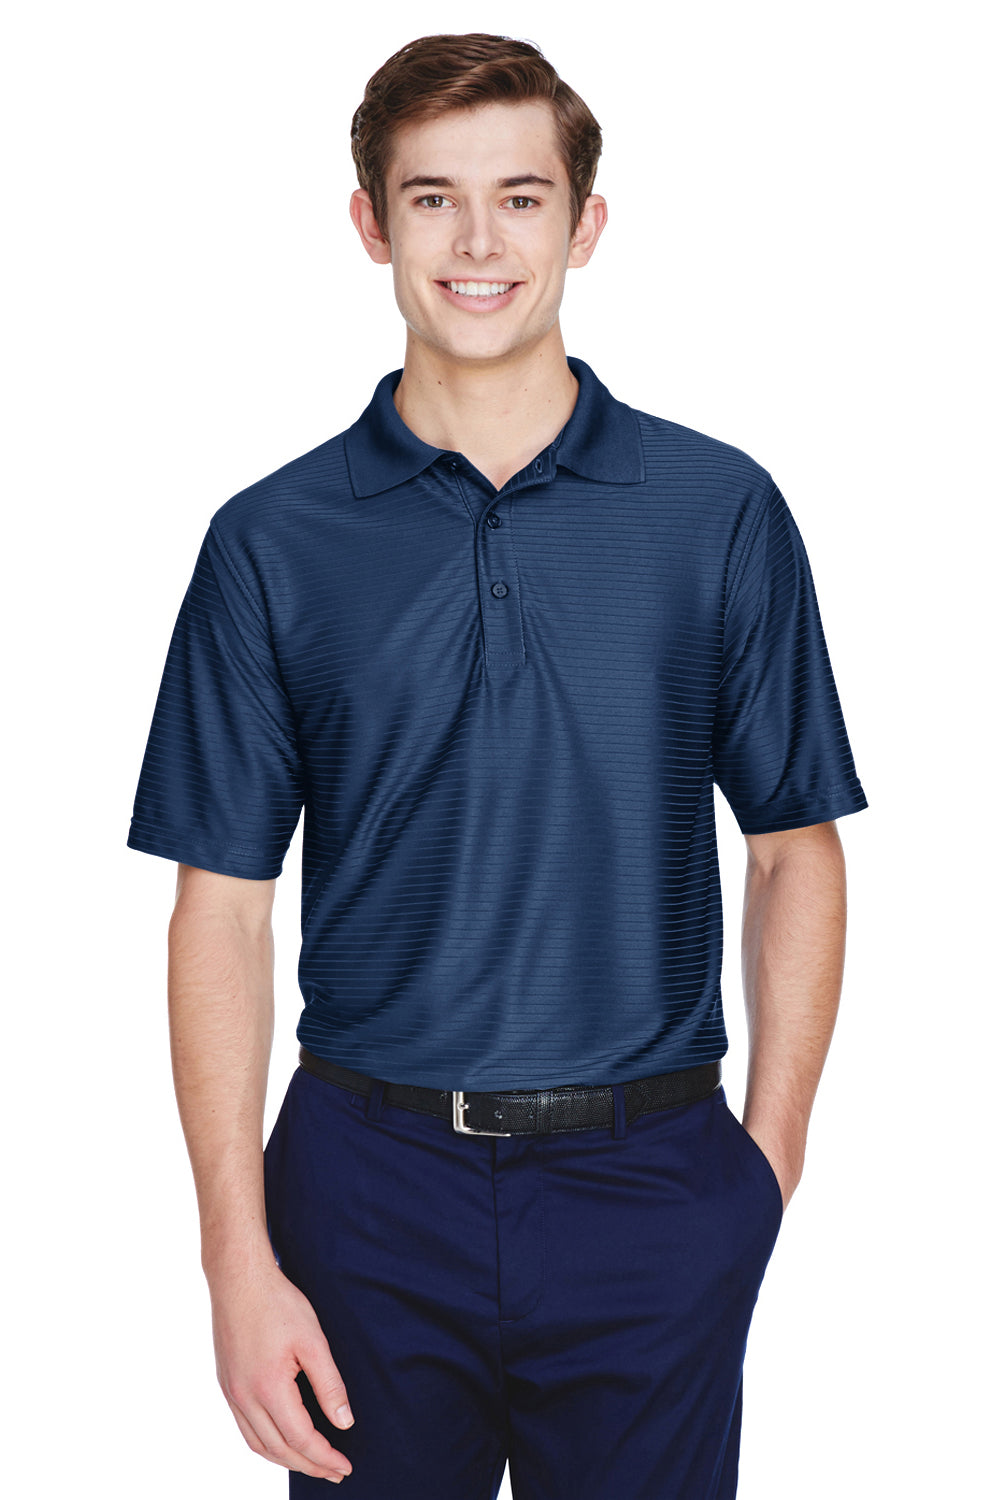 UltraClub 8413 Mens Cool & Dry Elite Performance Moisture Wicking Short Sleeve Polo Shirt Navy Blue Front